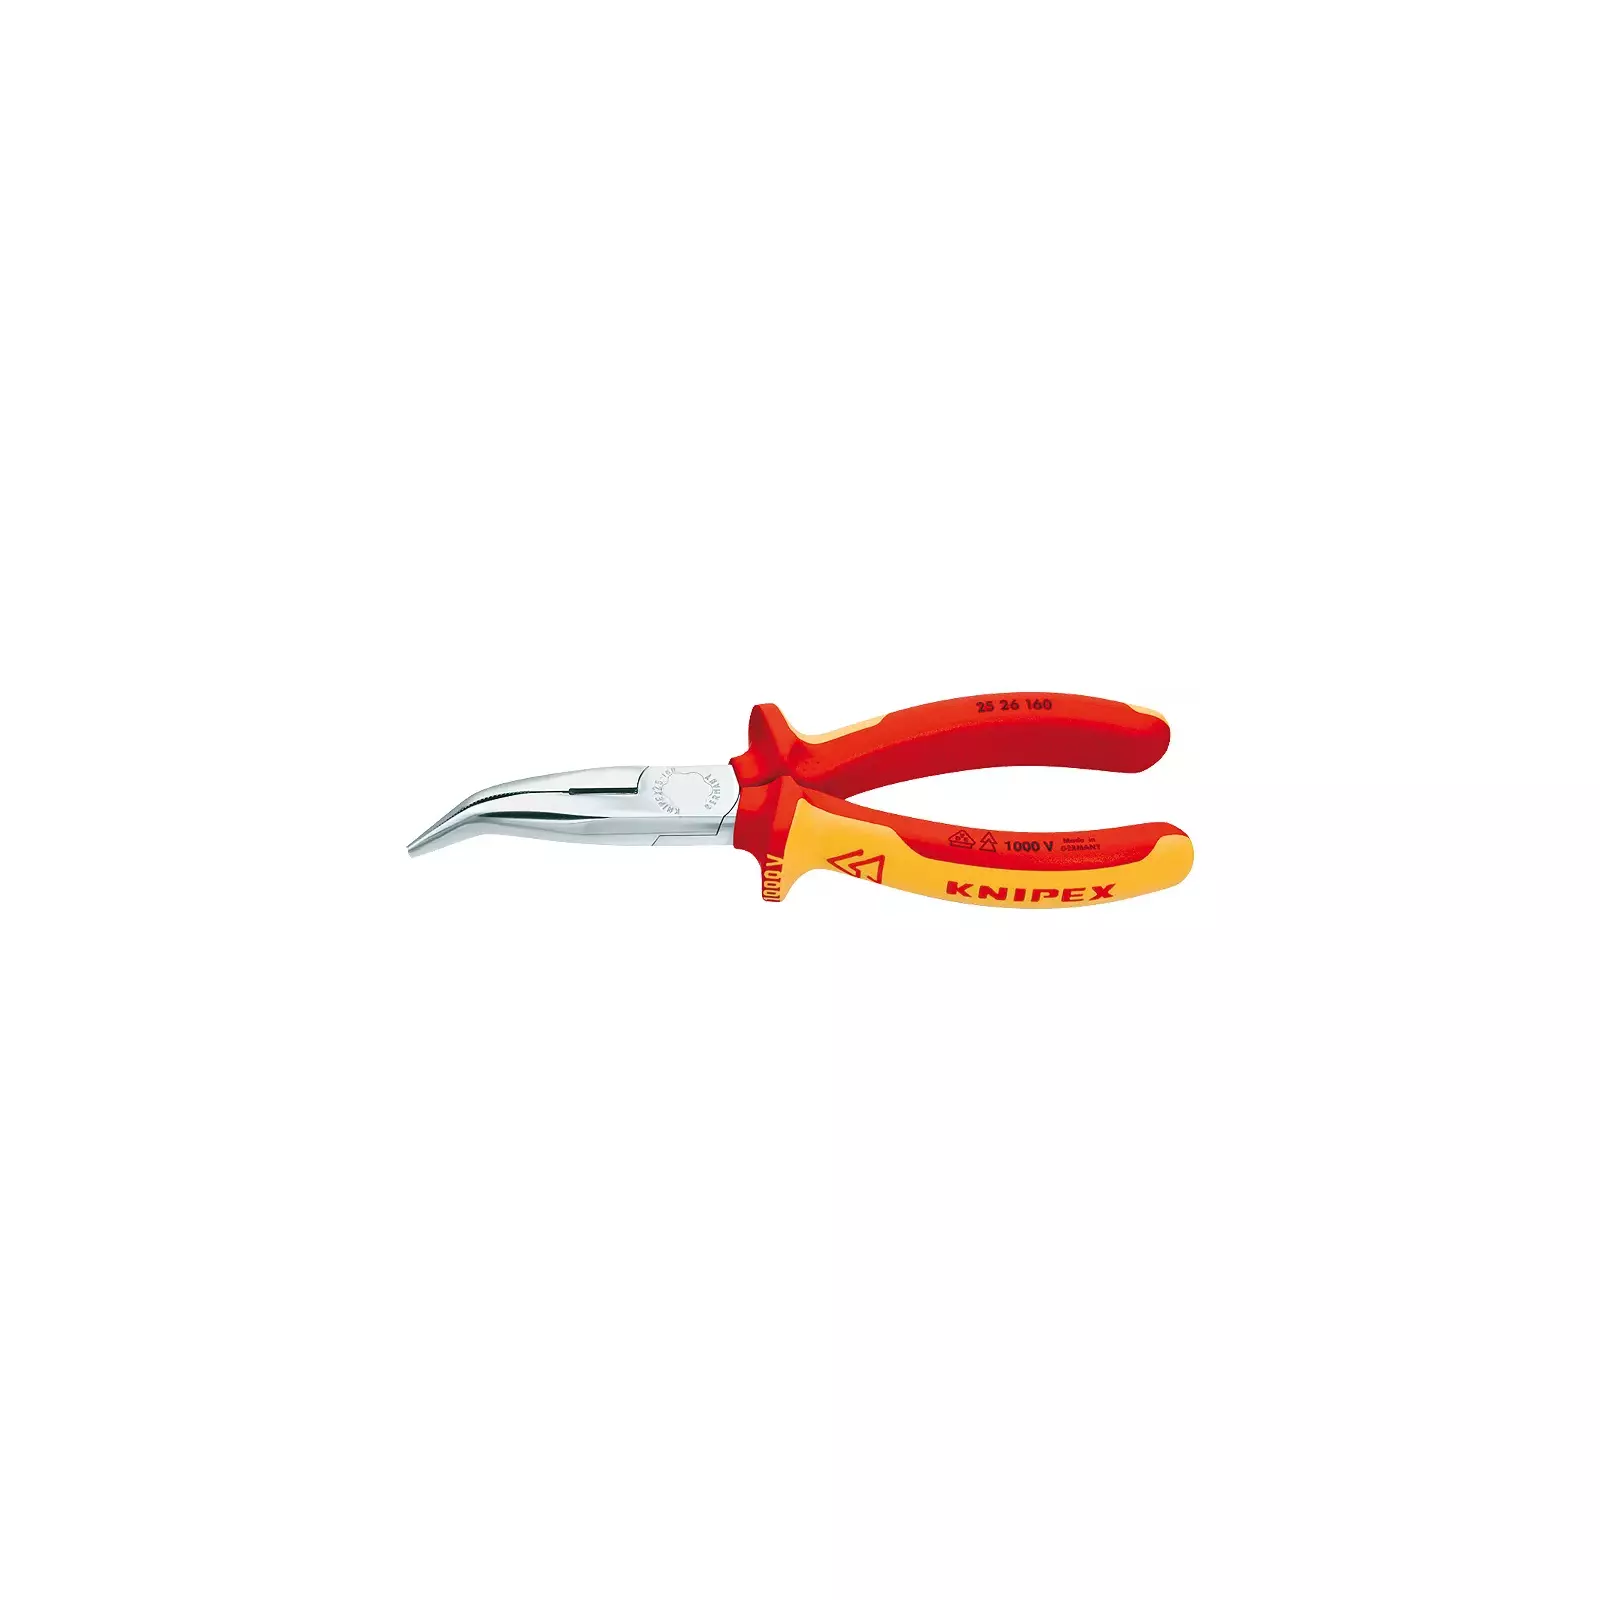 Knipex 25 26 160 Photo 1